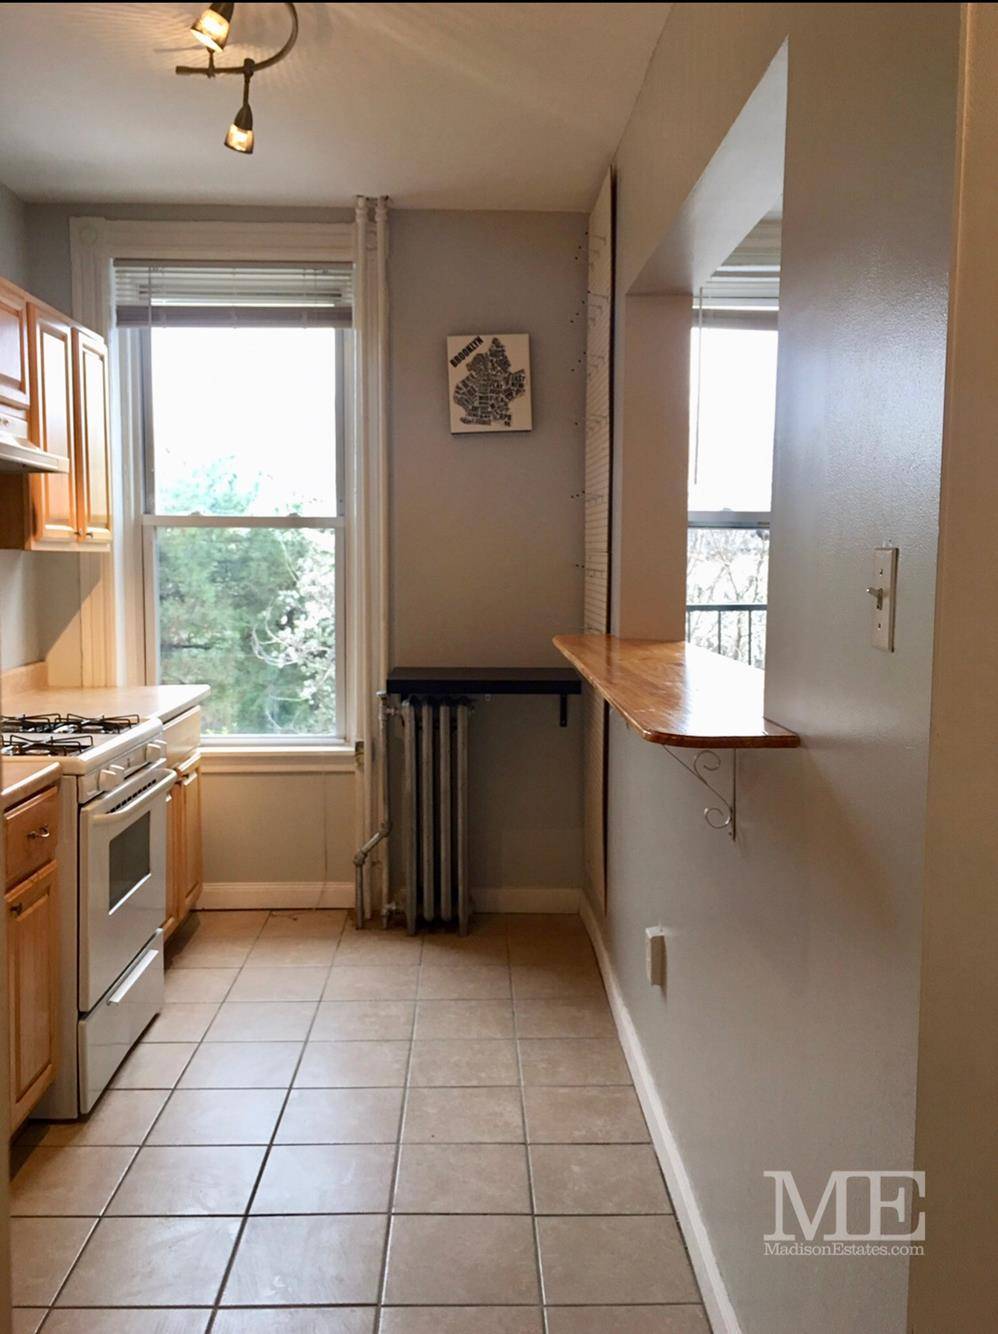 Heat and hot water included 2nd floor Private Roof access 1 bedroom 1 bathroomWalk in closet In prime Park Slope Brooklyn.